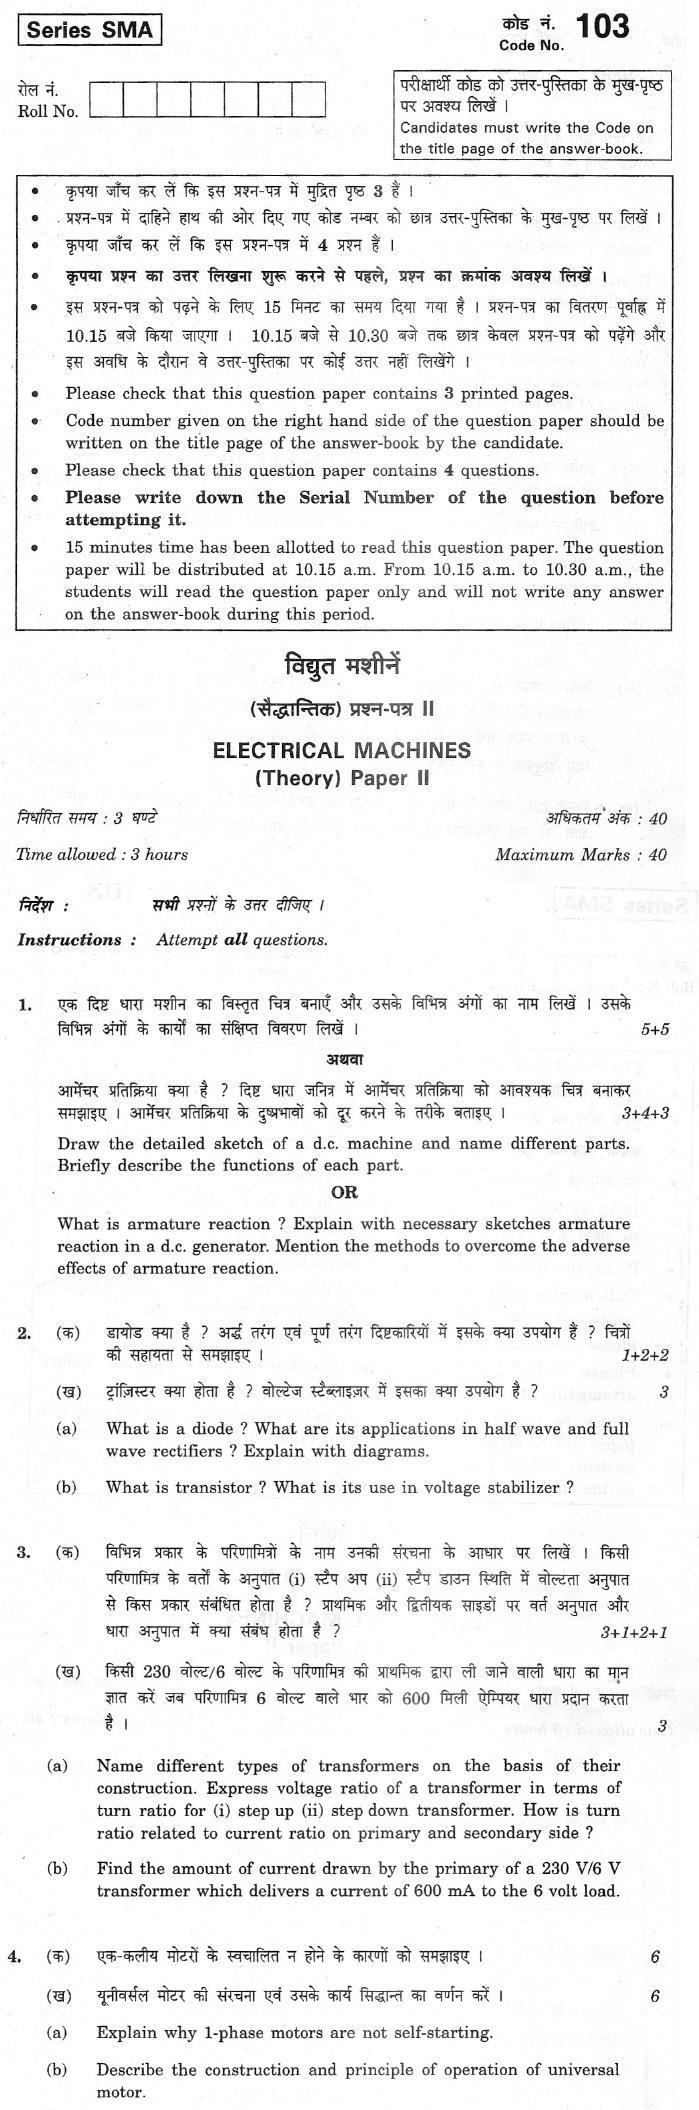 CBSE Class XII Previous Year Question Paper 2012: Electrical Machines Paper II